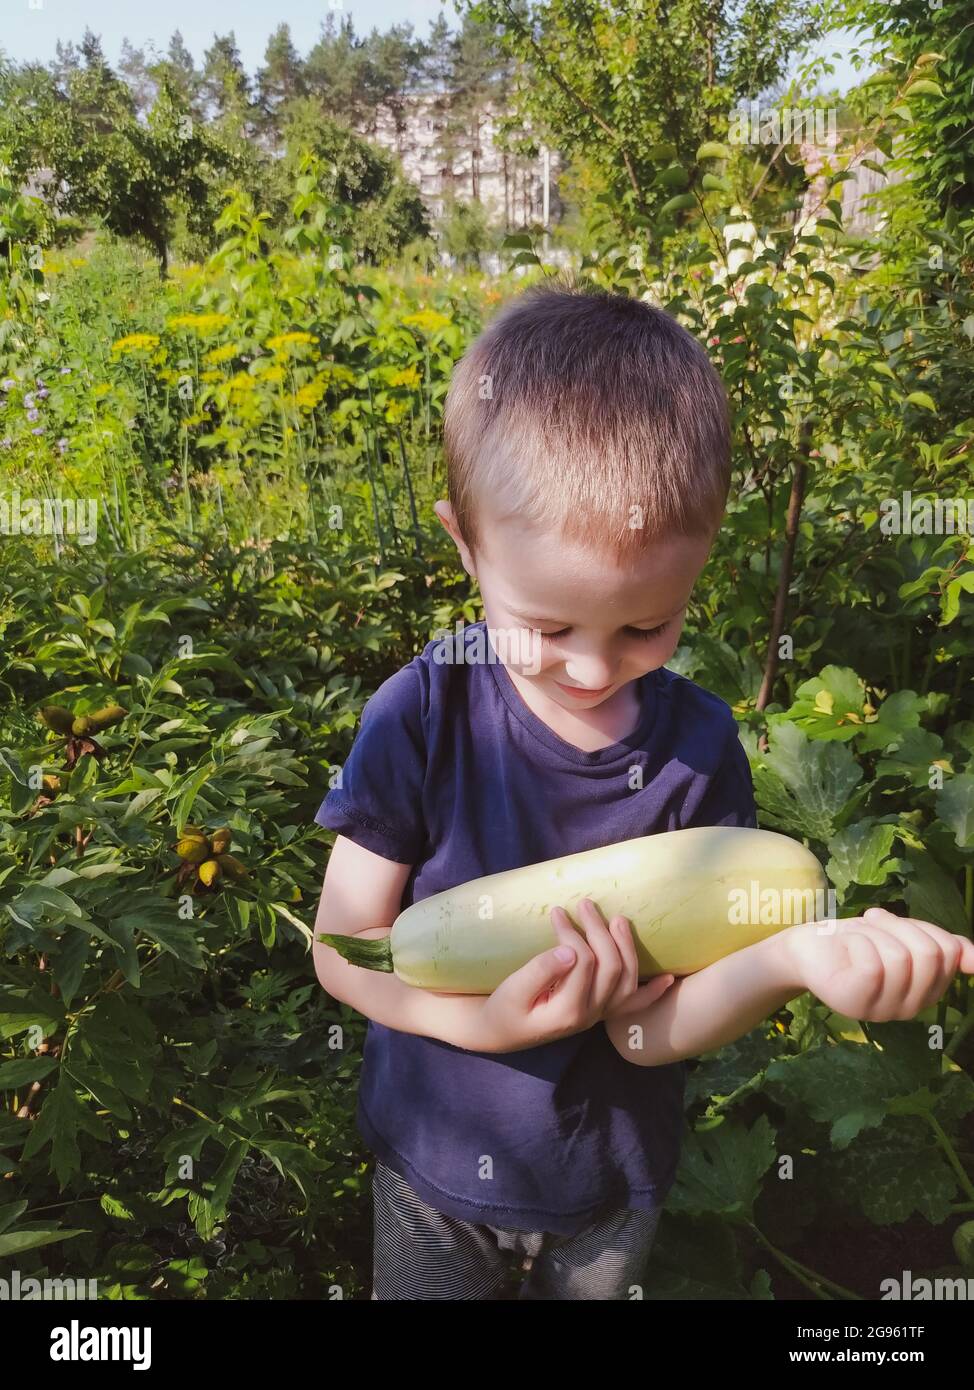 Boy smiles and looks at fresh vegetable marrow in the garden Stock Photo